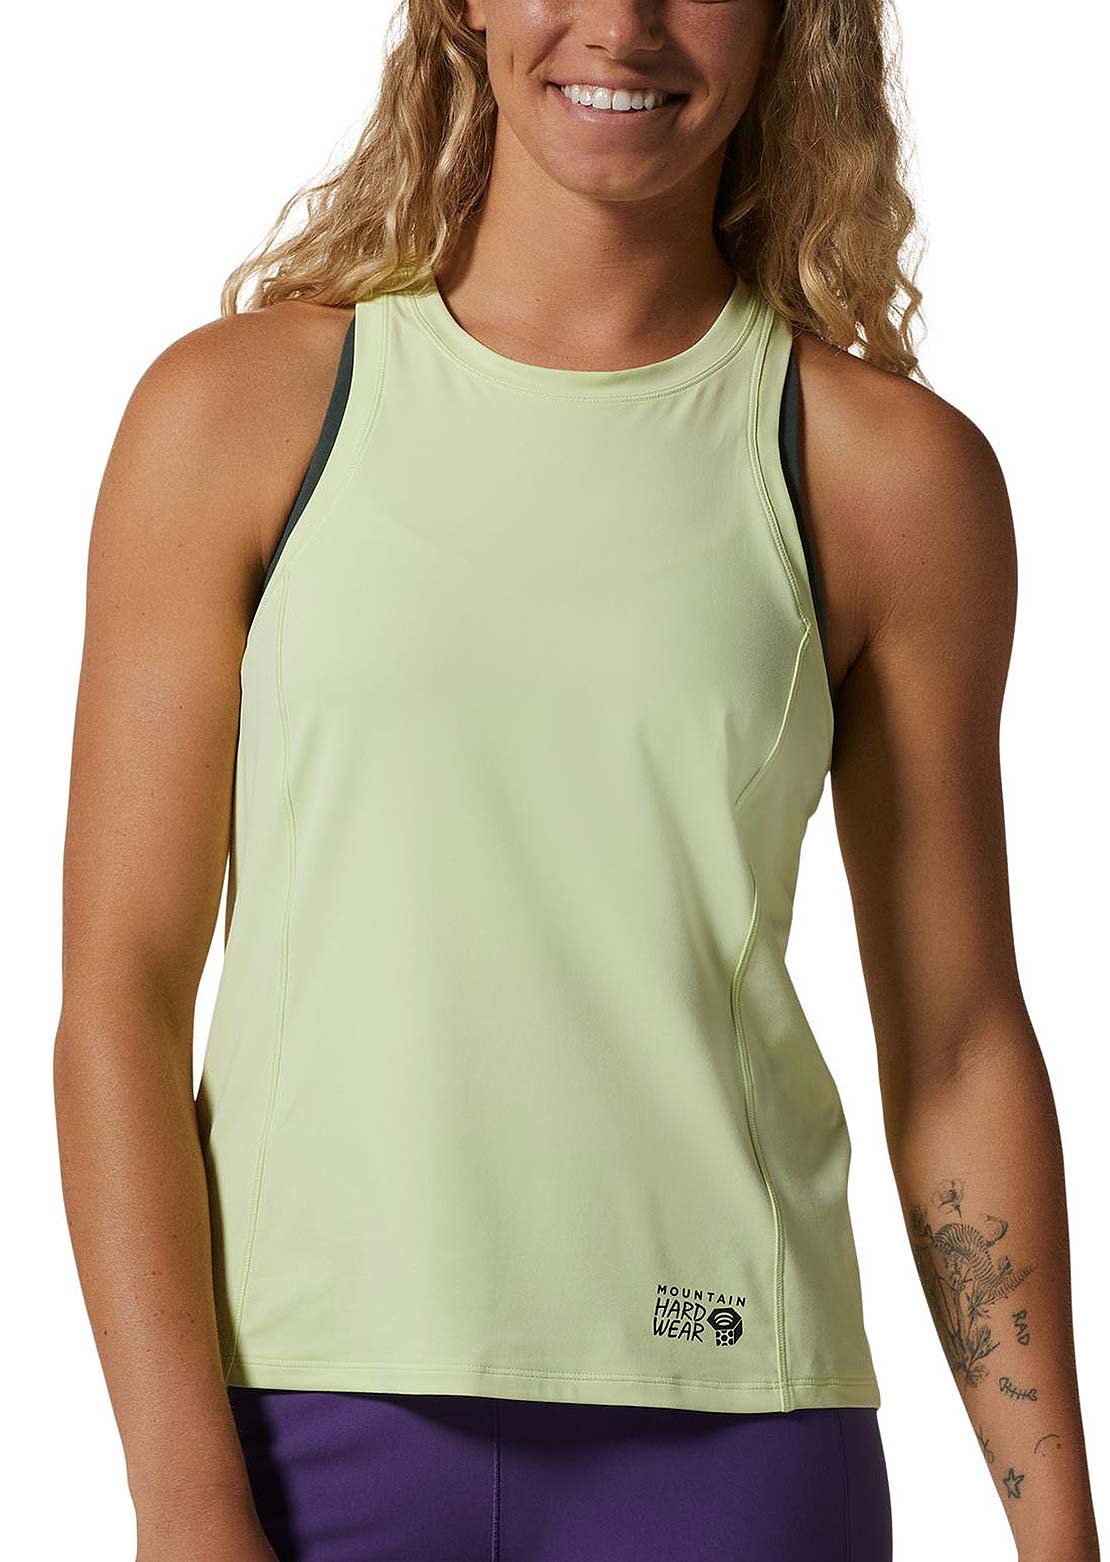 Champion Women's Sport Soft Touch Eco Crop Top - PRFO Sports